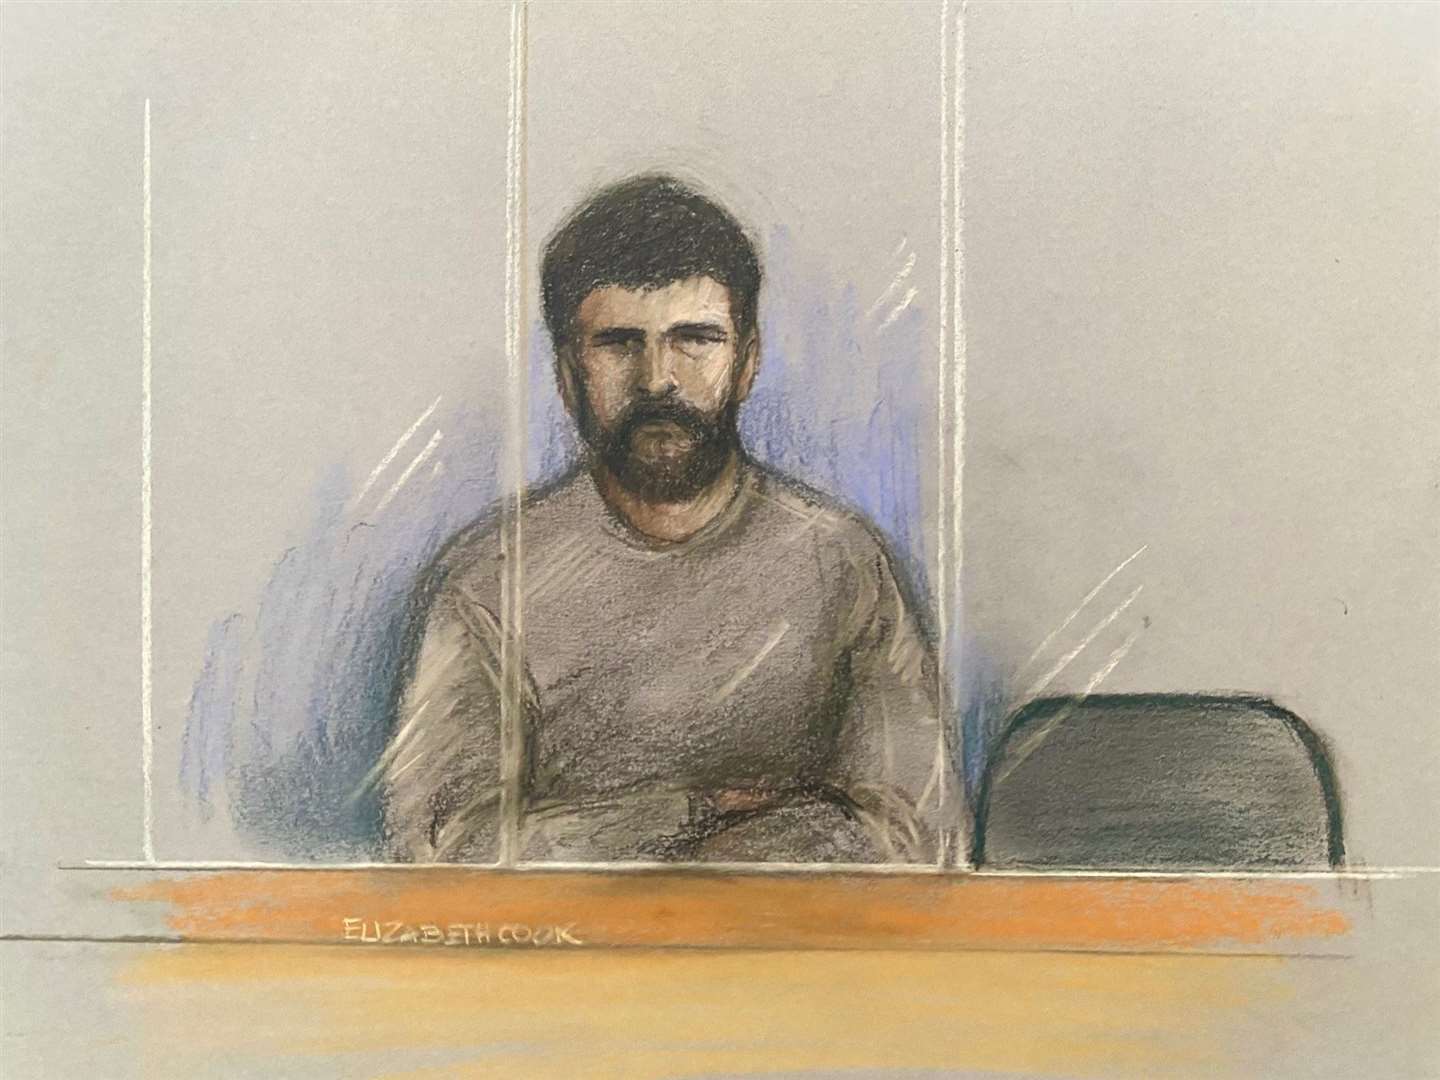 Sketch of Joshua Bowles at an earlier court hearing (Elizabeth Cook/PA)